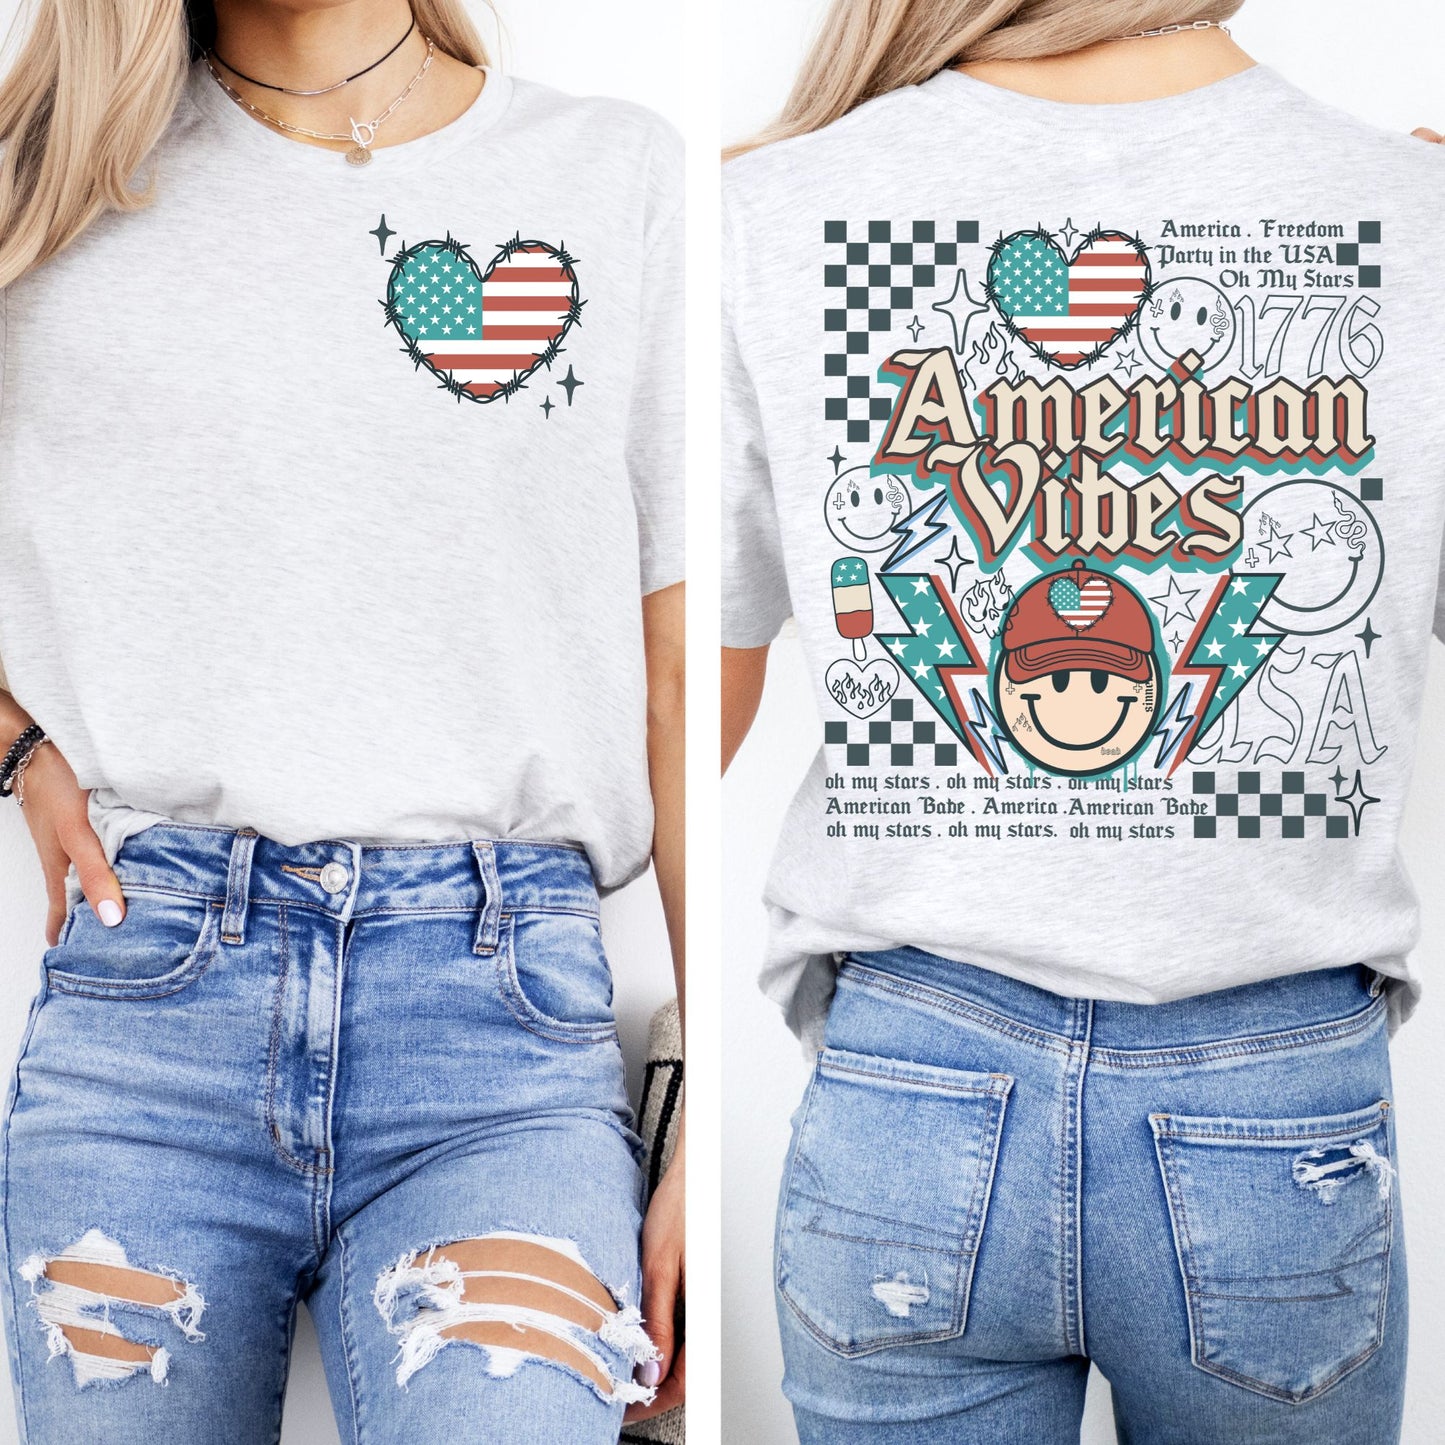 "American Vibes" Edgy 4th of July Inspired Patriotic Women's Tee